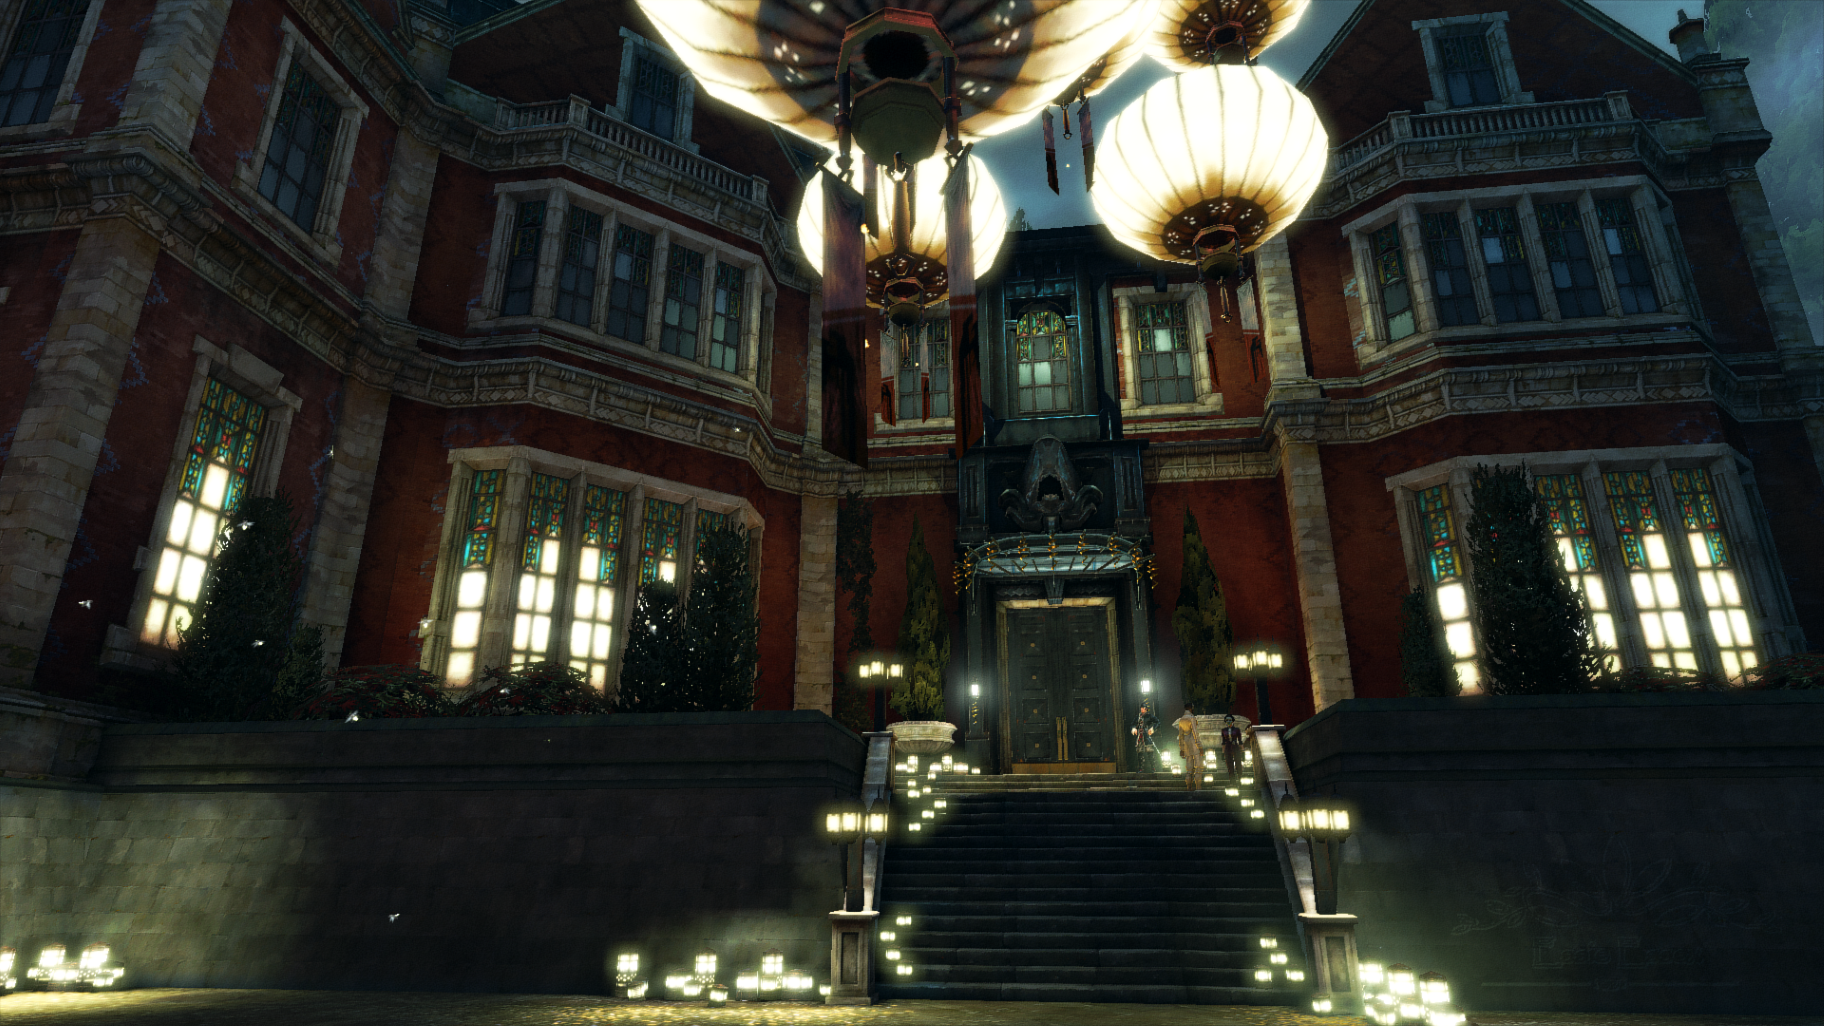 Screenshot from the game. Depicts a large red brick mansion at night, lit up from the inside.